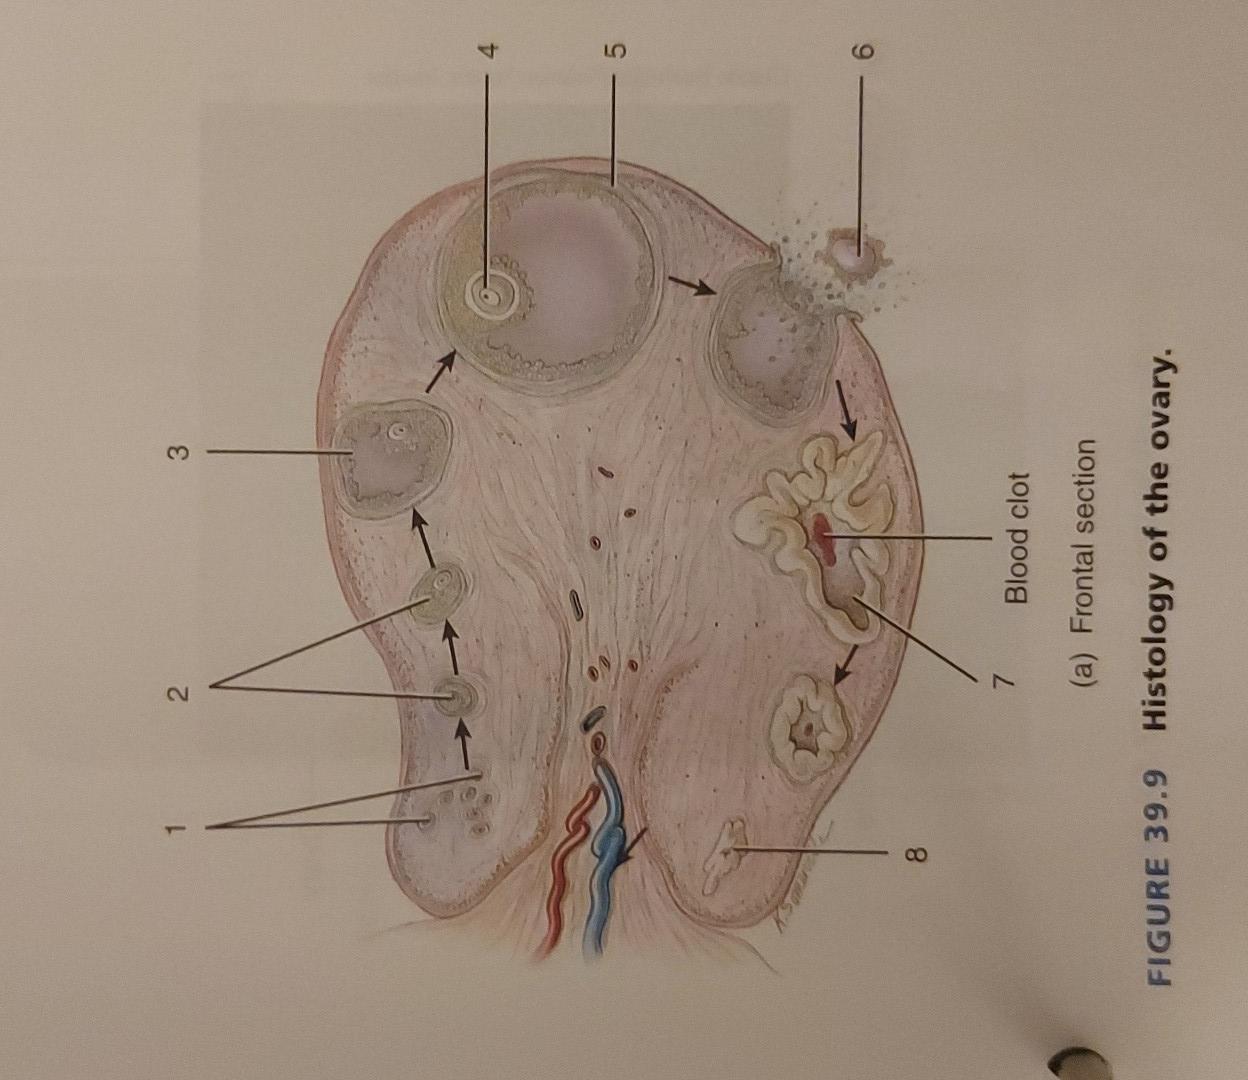 T.S. of ovary | Biology diagrams, Human eye diagram, Ovaries